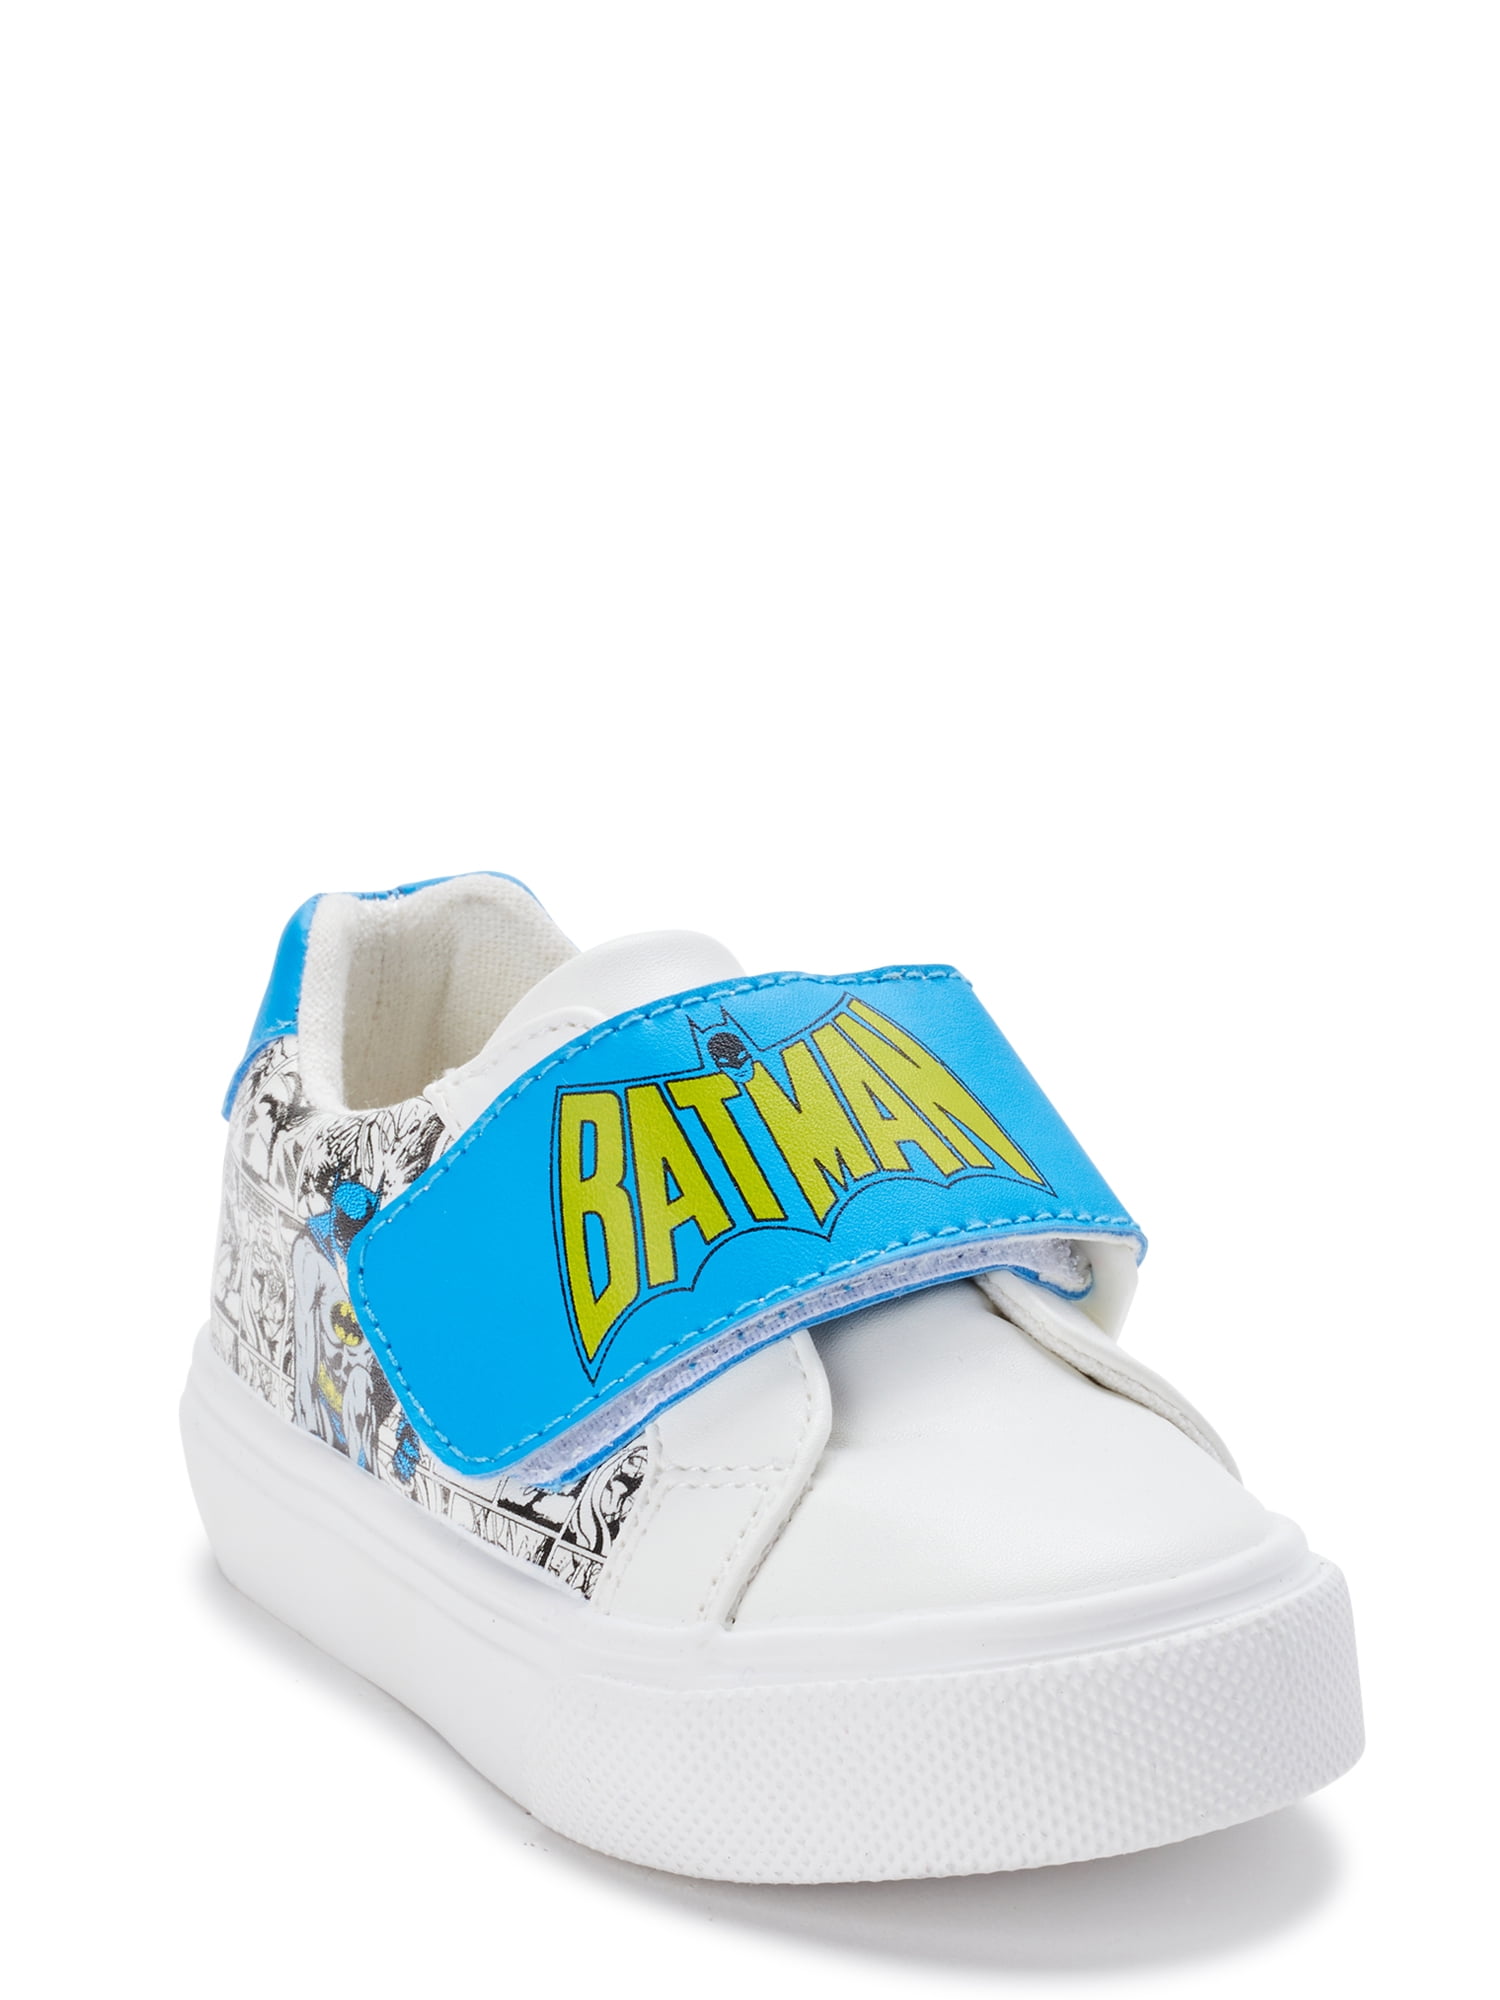 batman converse for toddlers